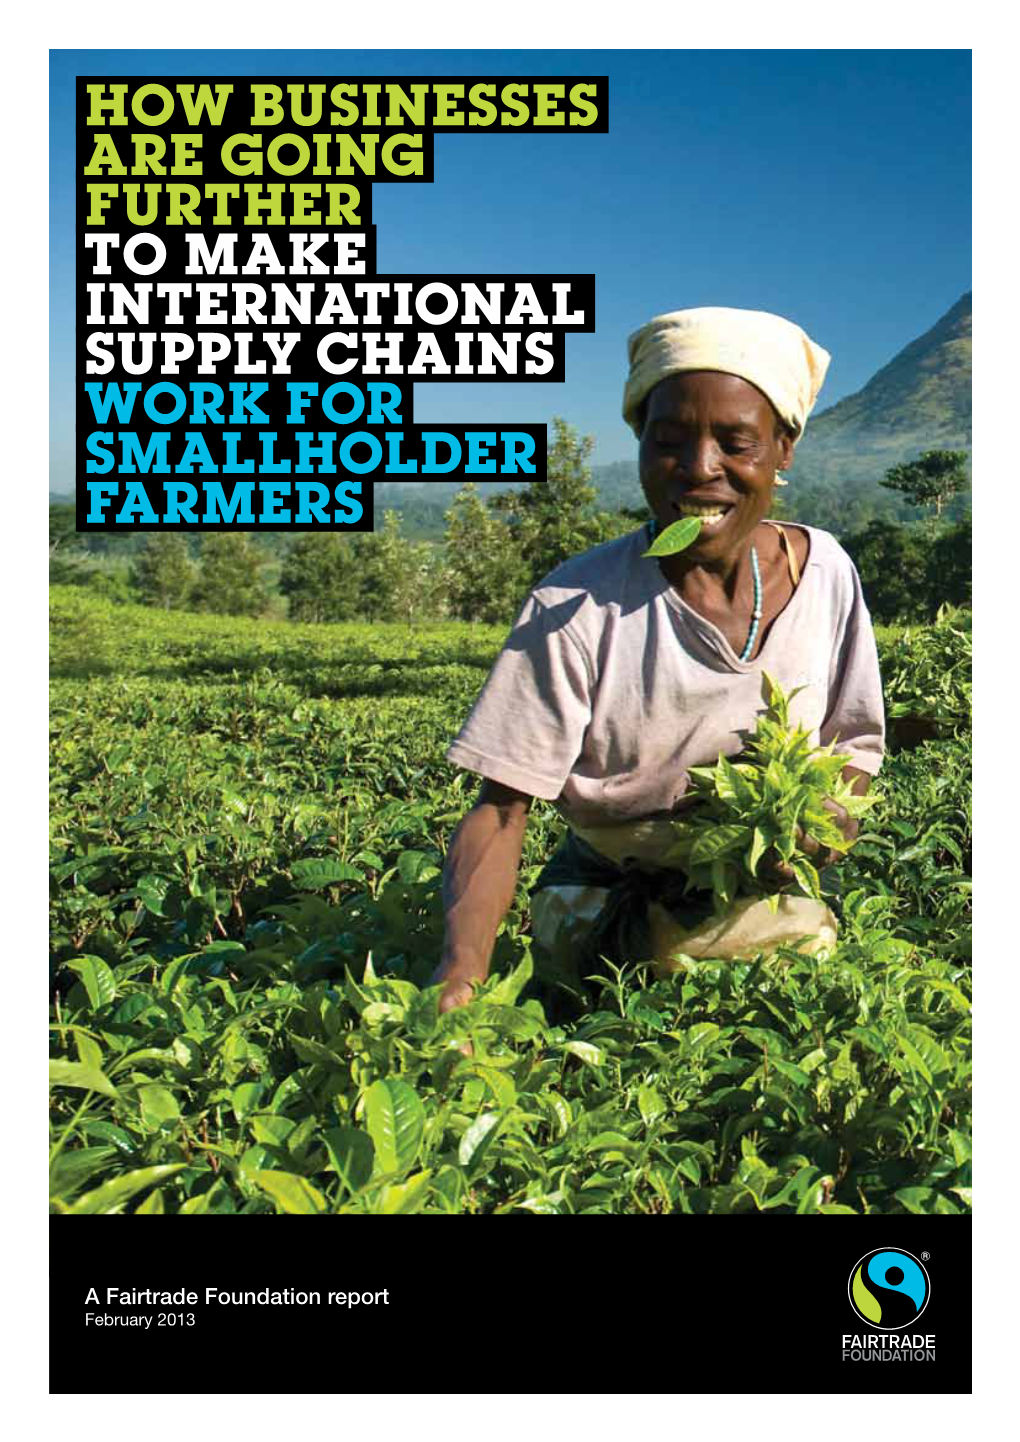 How Businesses Are Going Further to Make International Supply Chains Work for Smallholder Farmers